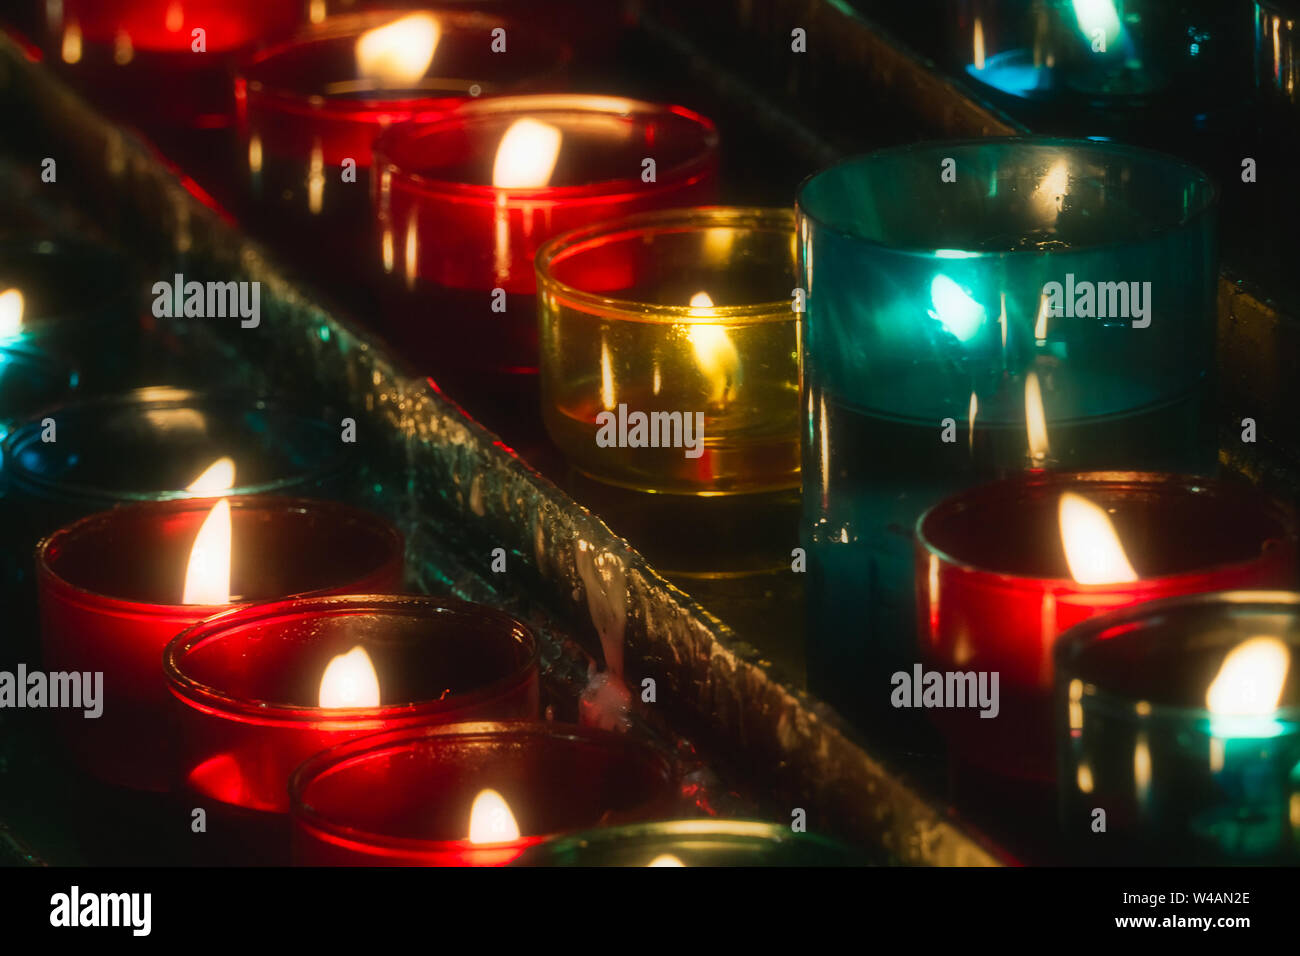 Closeup of rows of candles burning in multicolored glass tealights in a church. Stock Photo